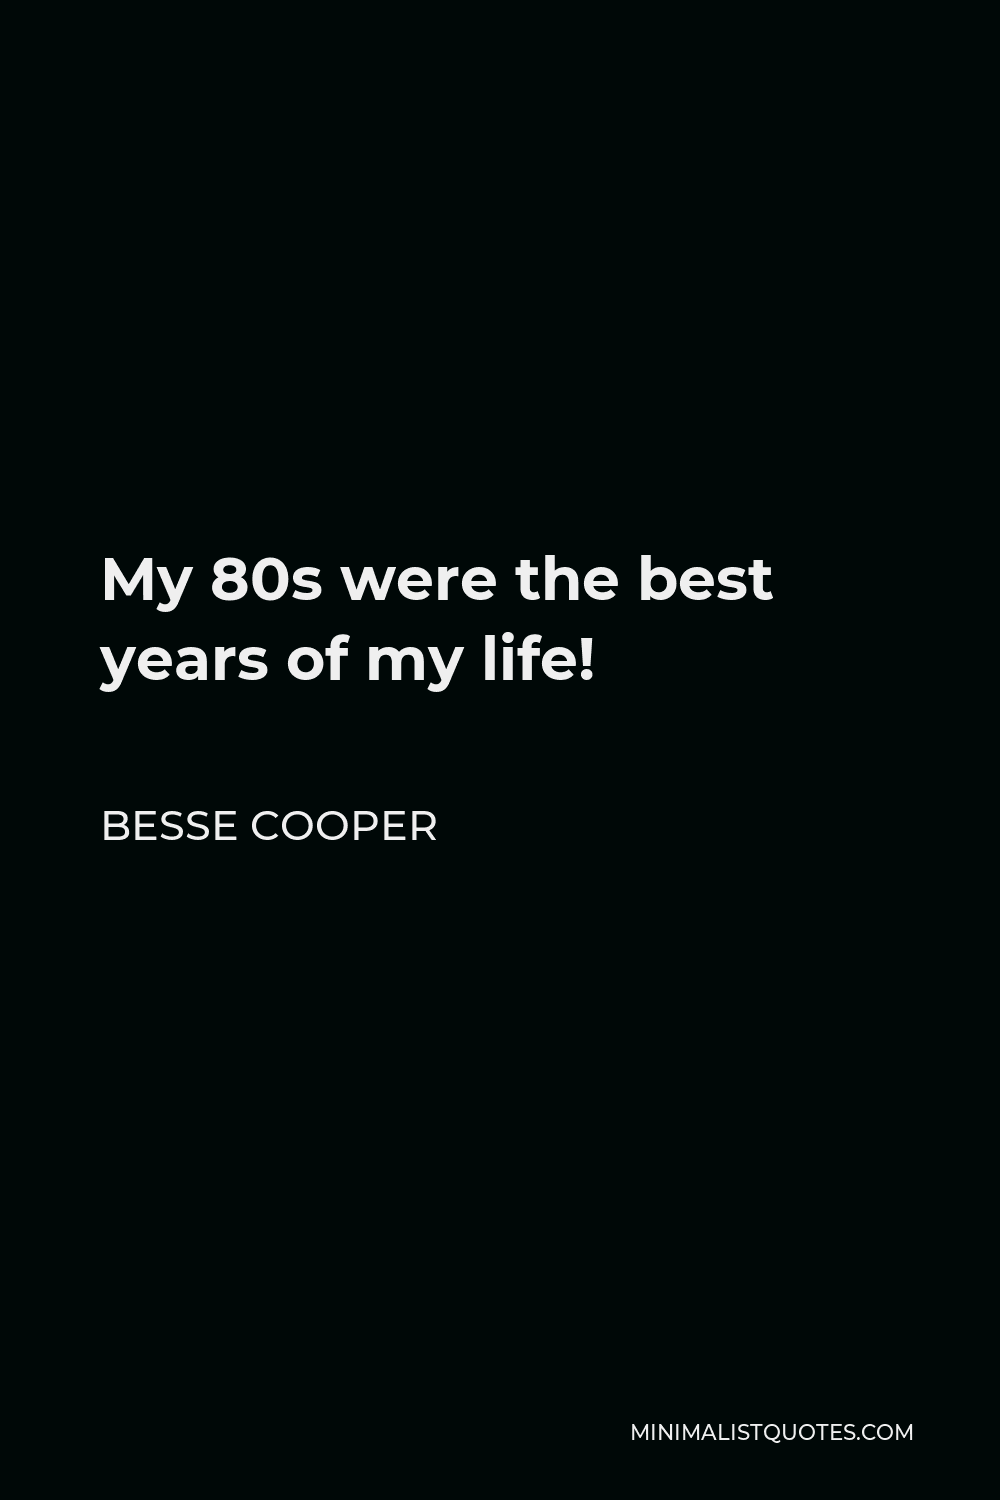 Besse Cooper Quote - My 80s were the best years of my life!